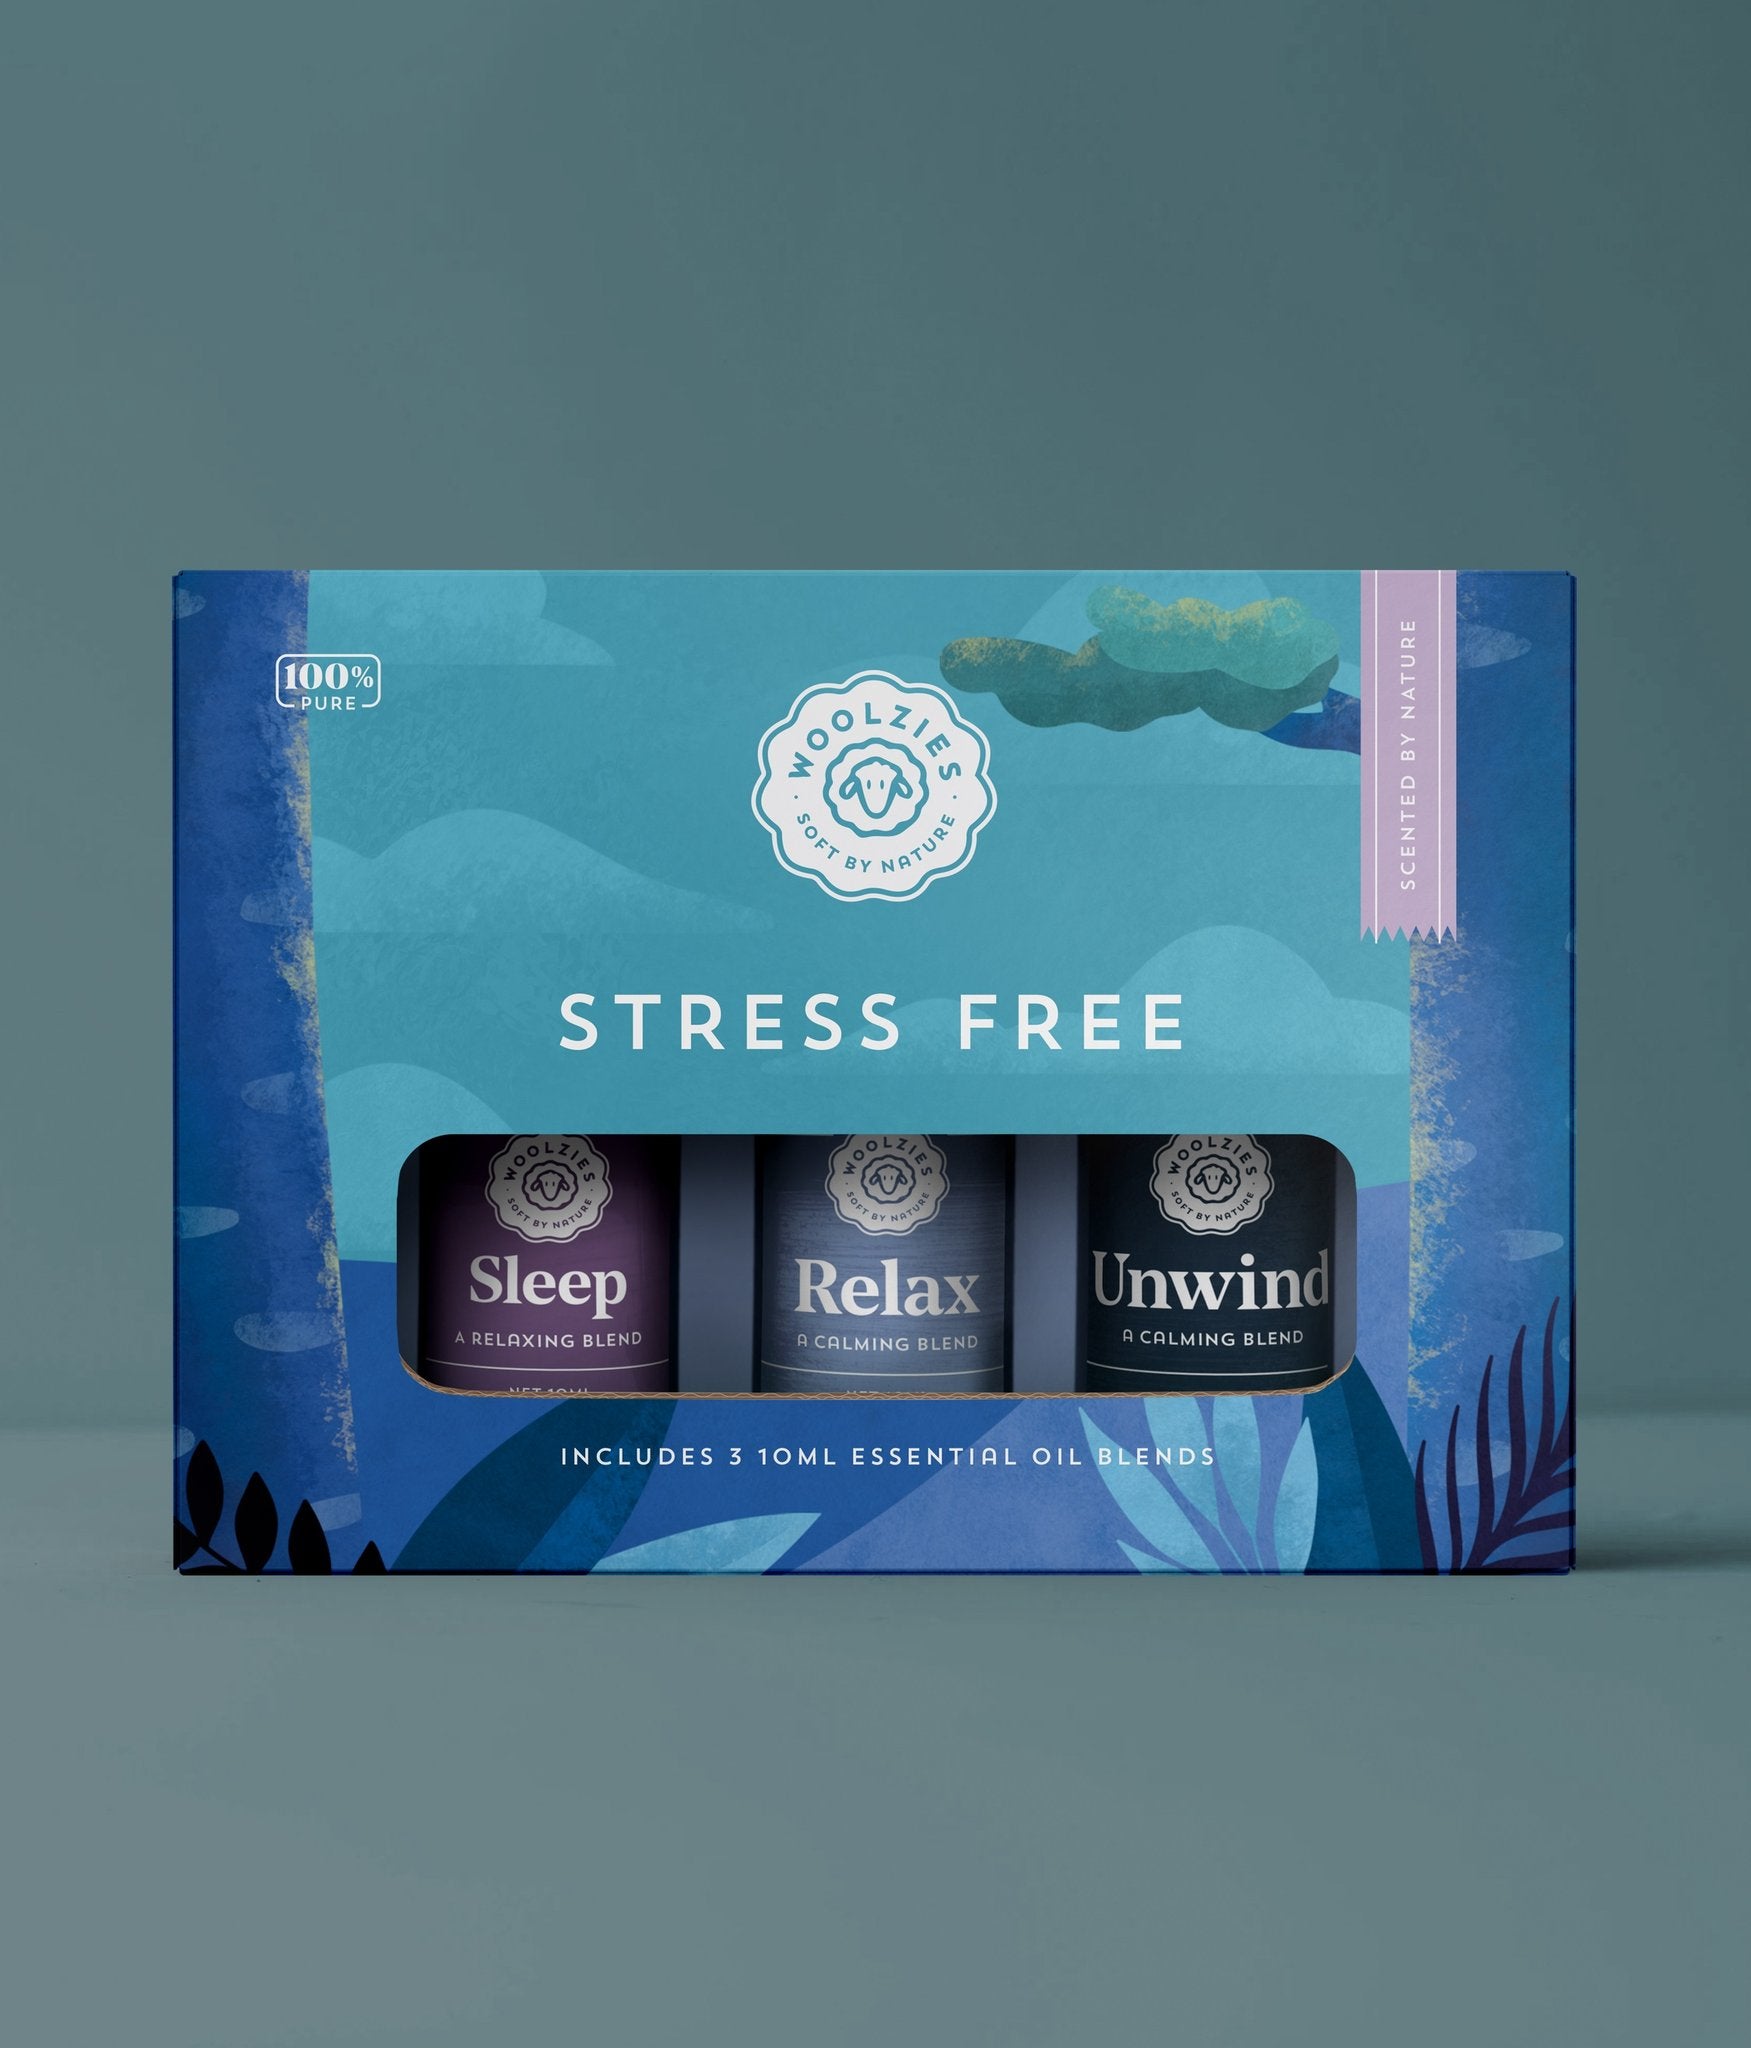 WOOLZIES STRESS FREE ESSENTIAL OIL COLLECTION